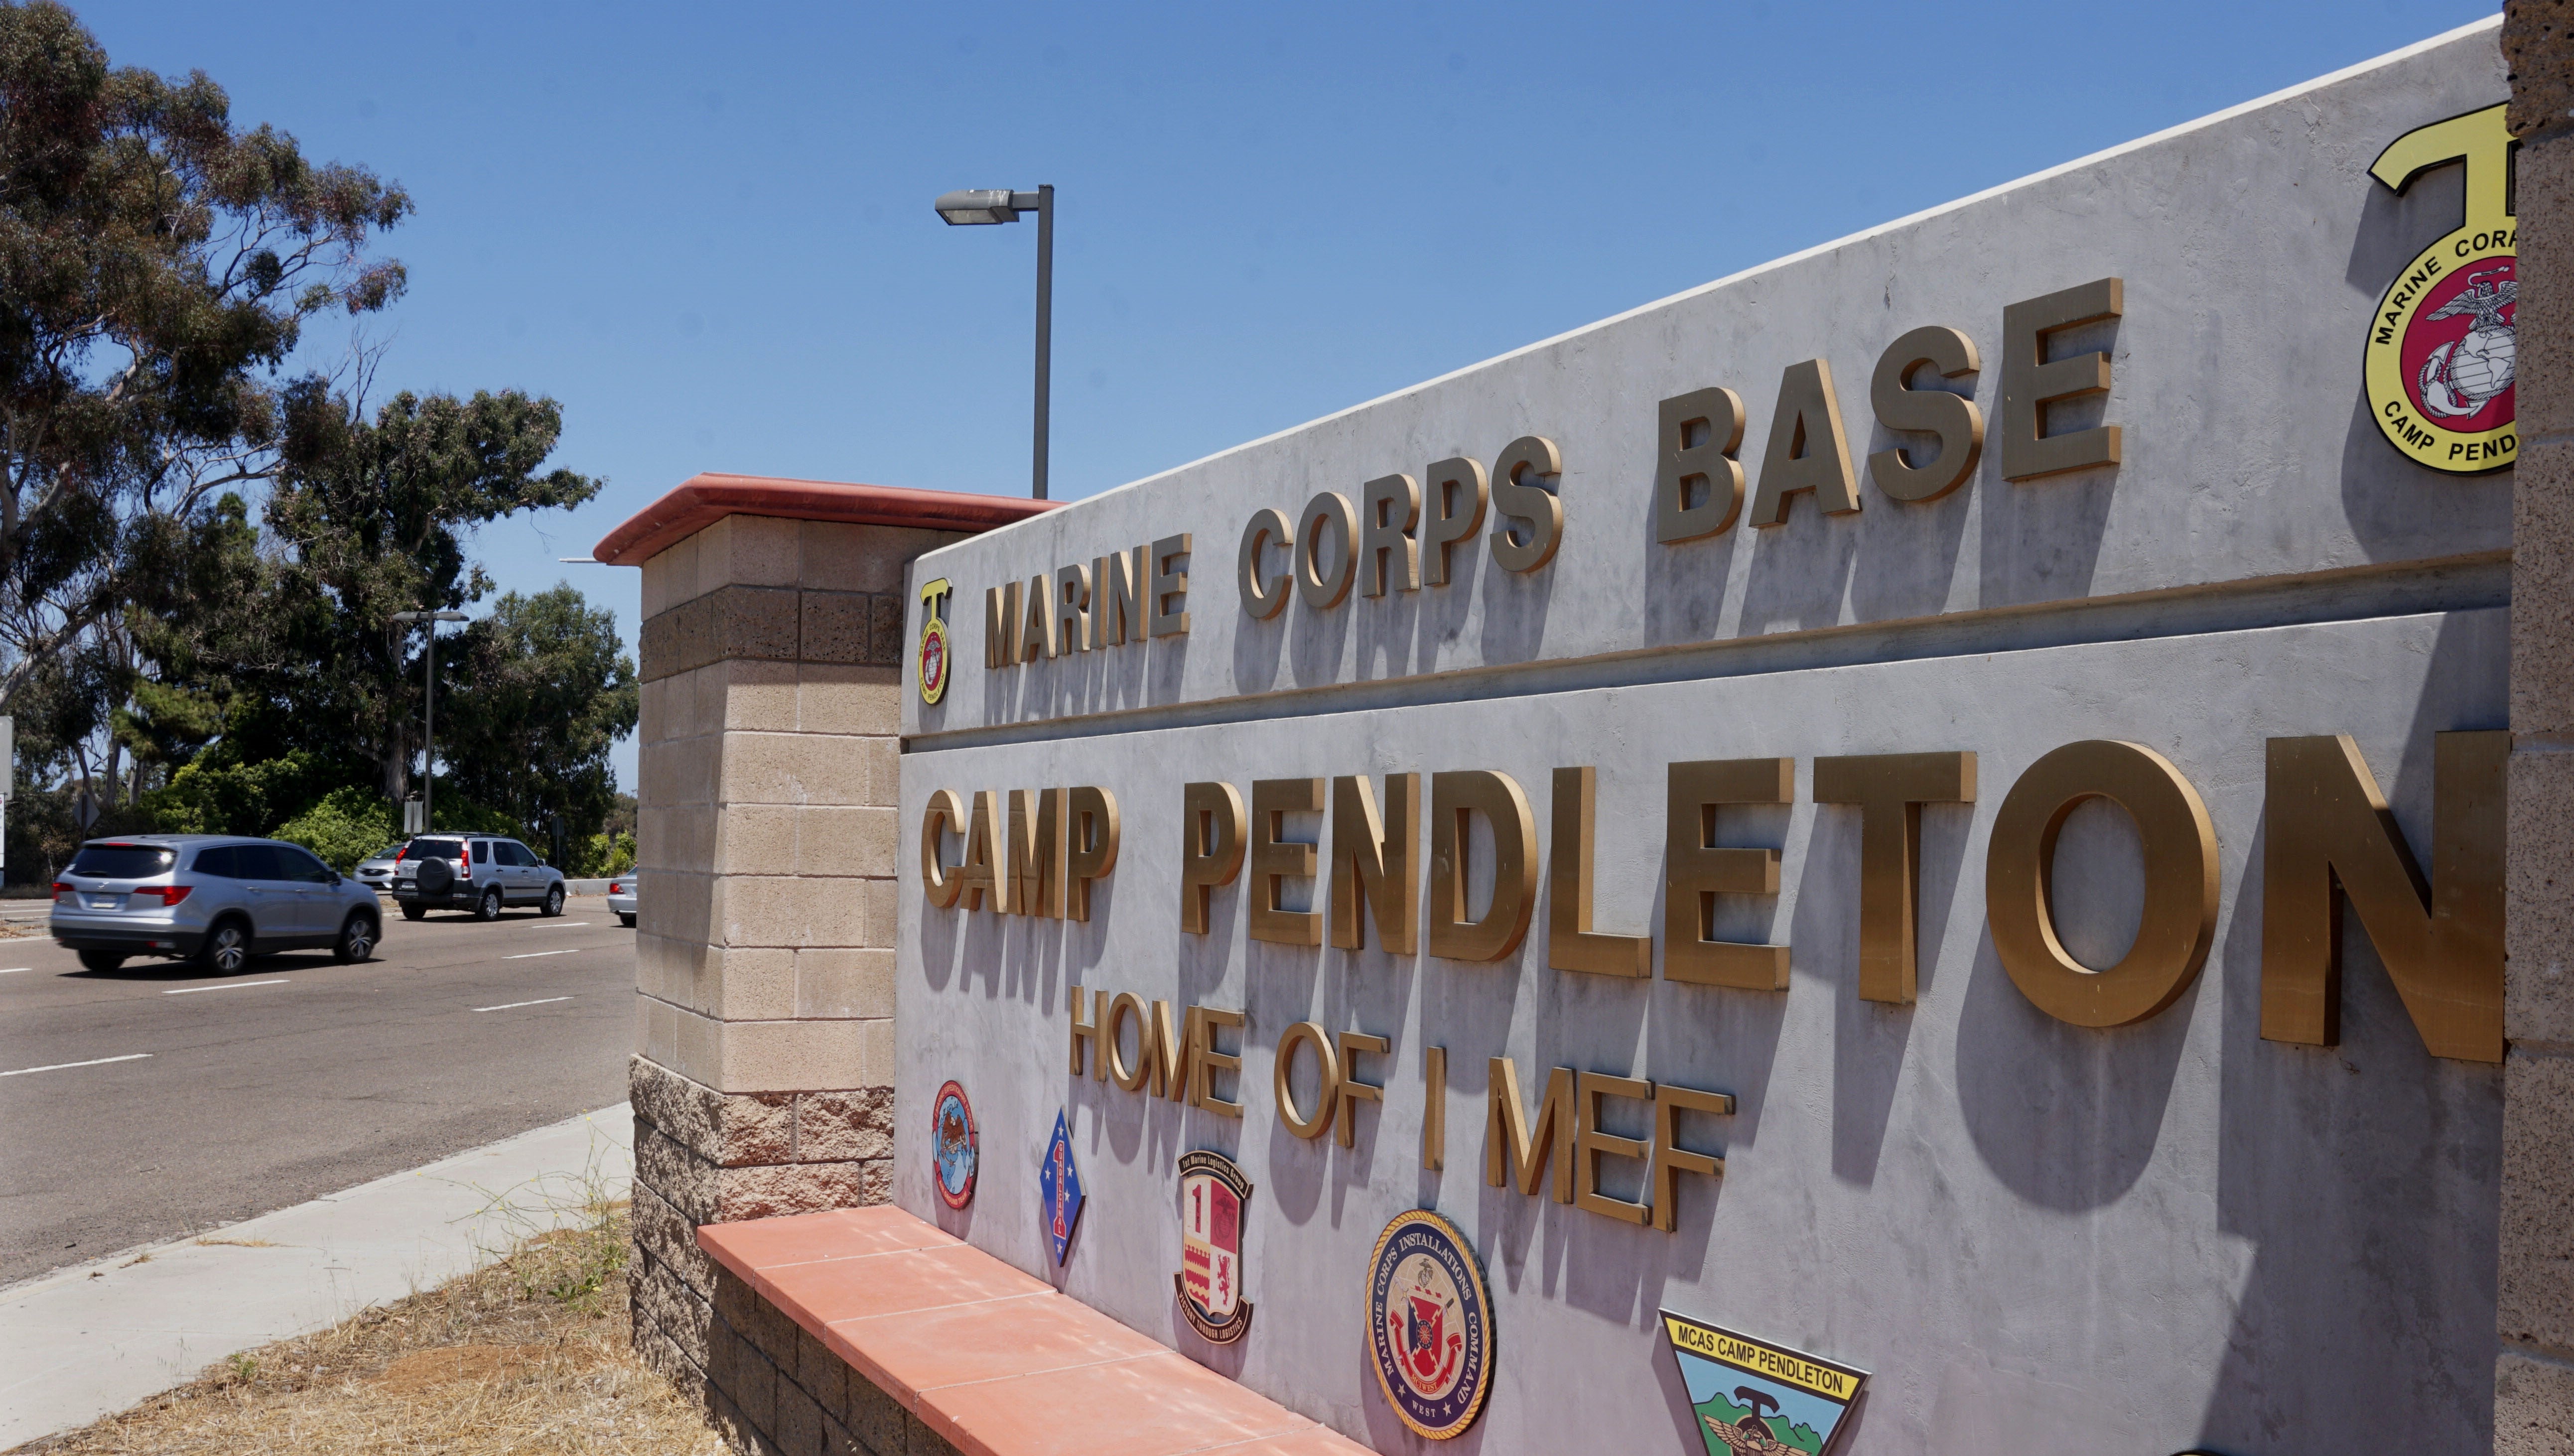 Underage Girl Found in Barracks May Have Met Marine on Tinder Report Inside Edition